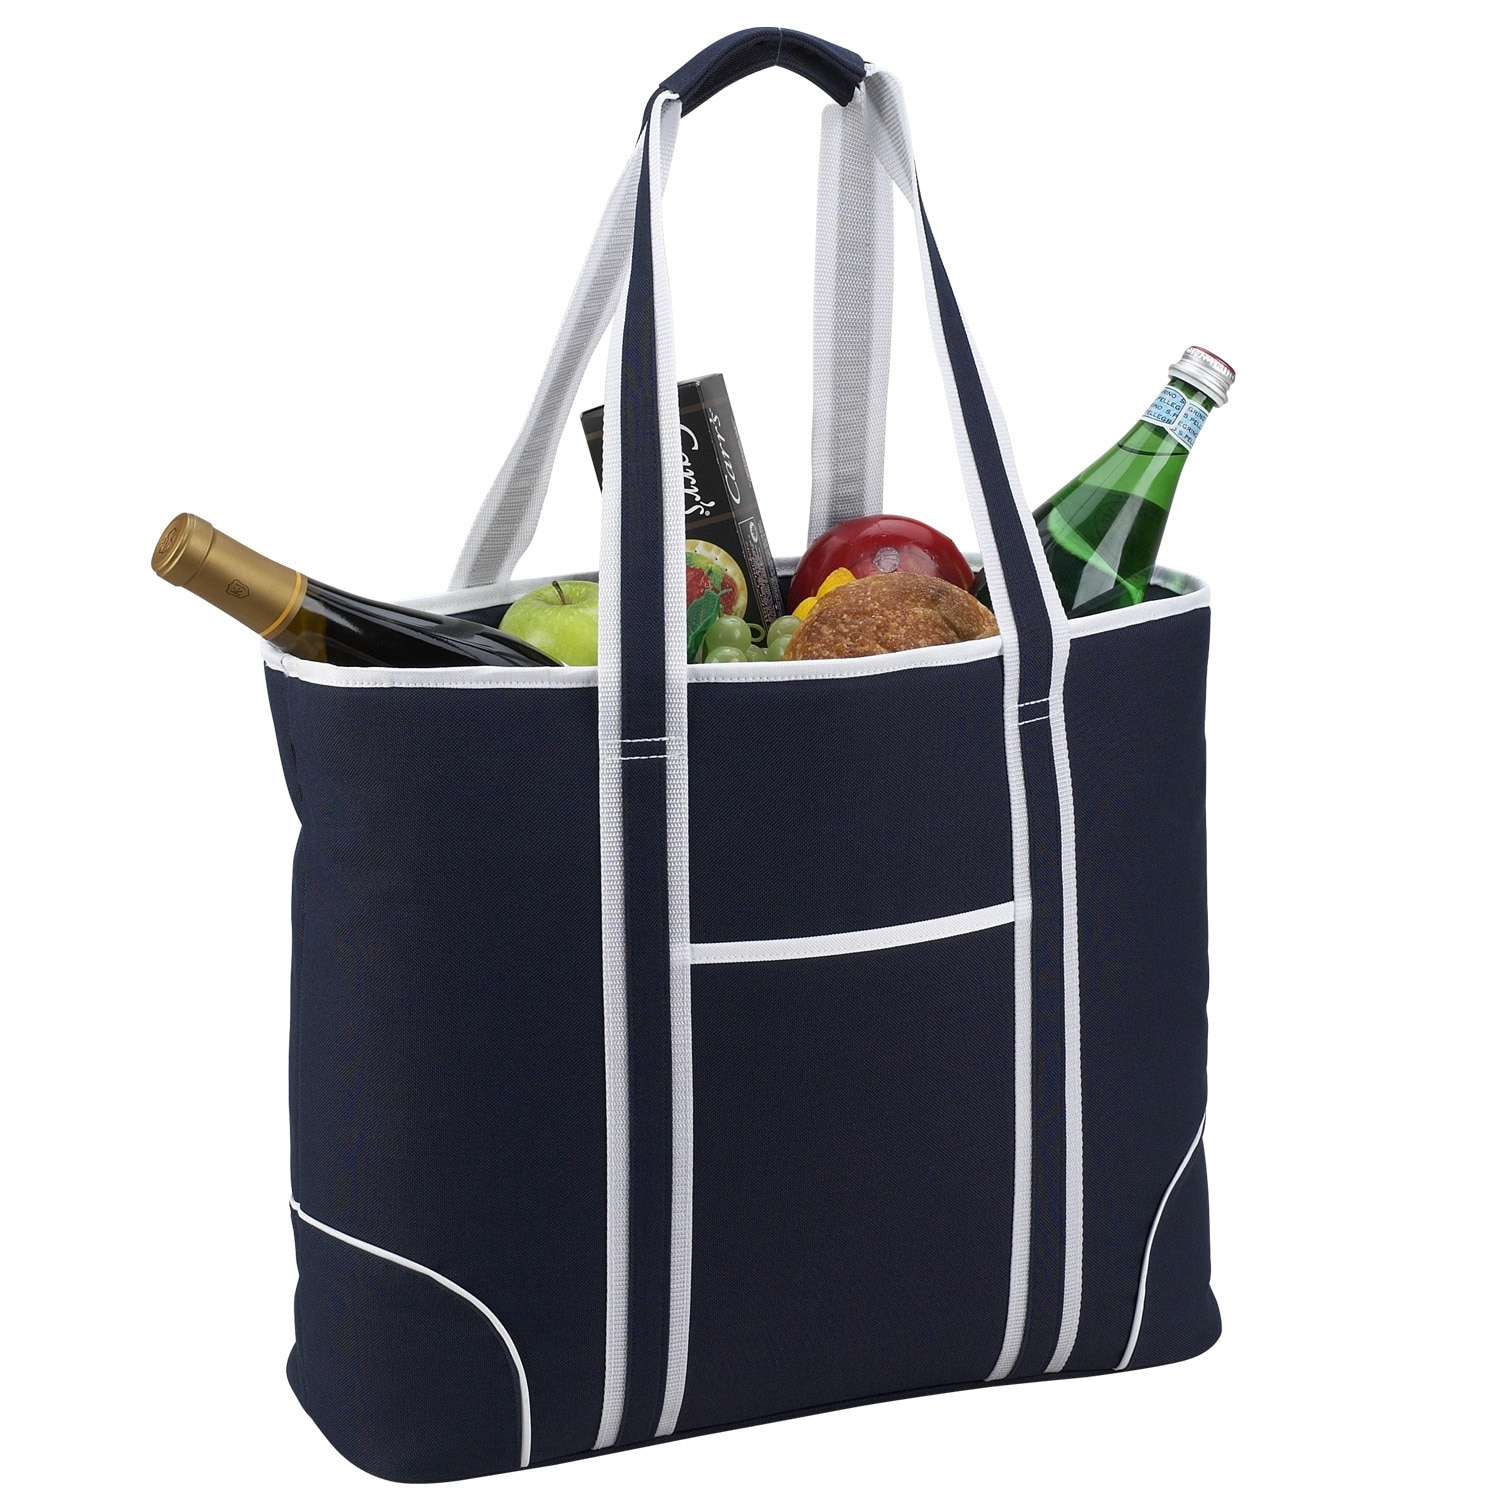 https://ak1.ostkcdn.com/images/products/is/images/direct/02e9cf4e09331740d114f8aad53ec06453740f74/Picnic-at-Ascot-Extra-Large-Insulated-Cooler-Bag---30-Can-Tote.jpg